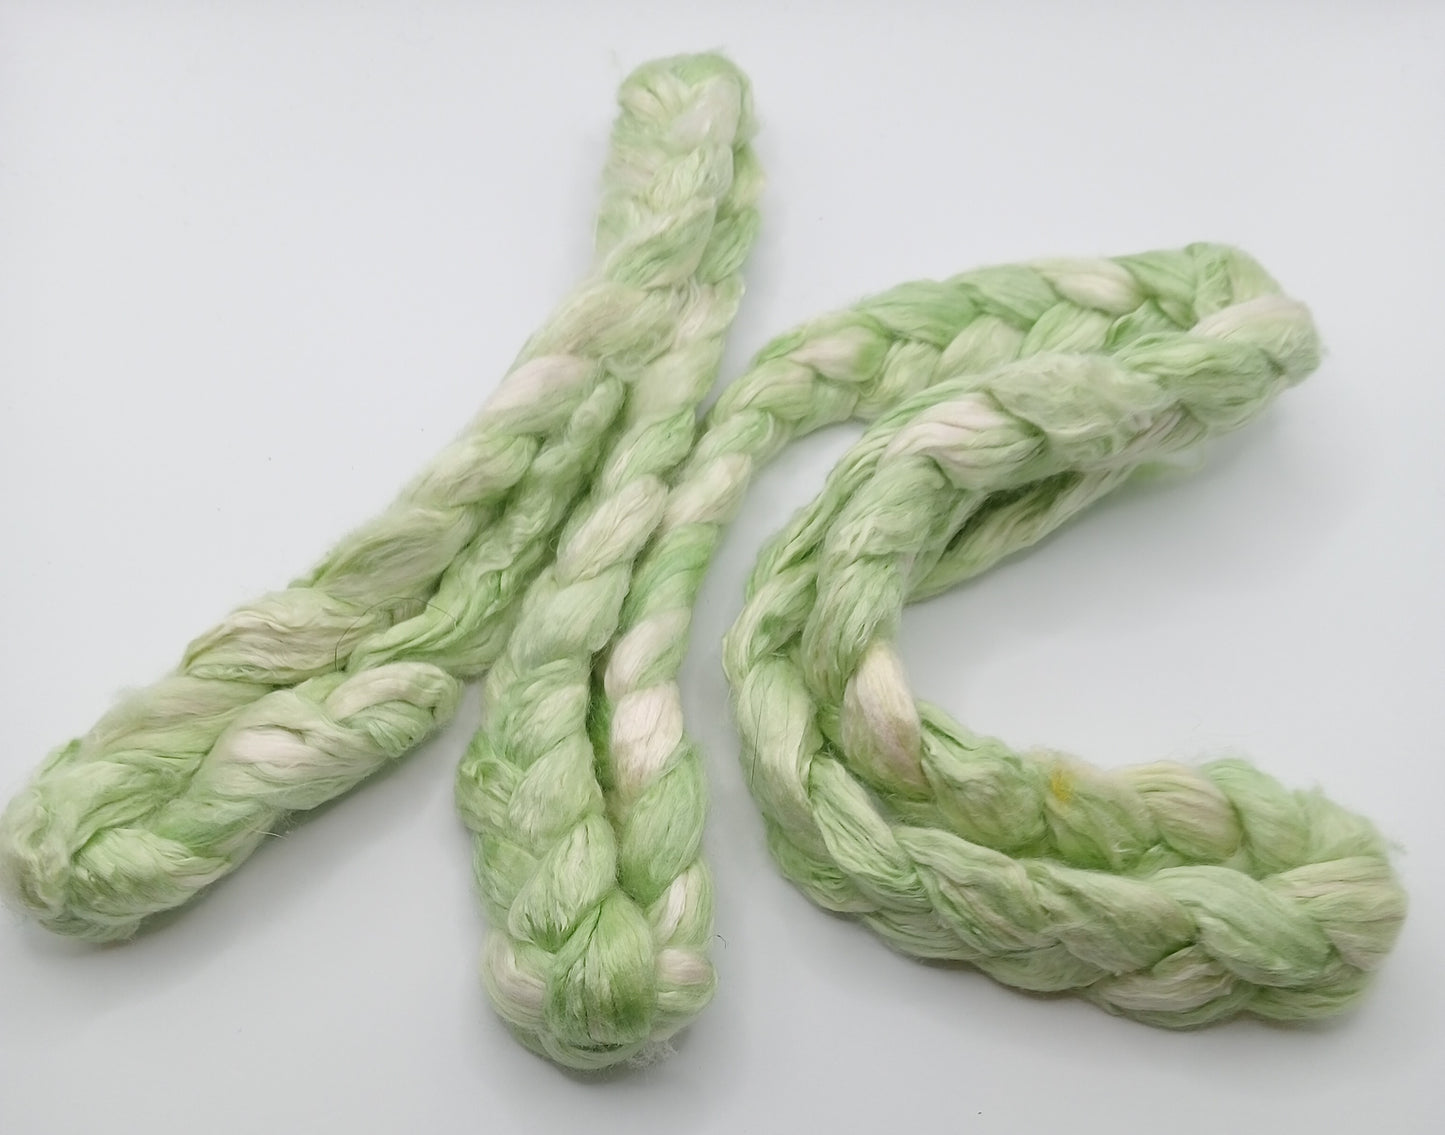 50G 'A' Grade Pure Mulberry Silk- "Pale Greens" Hand Dyed Luxury